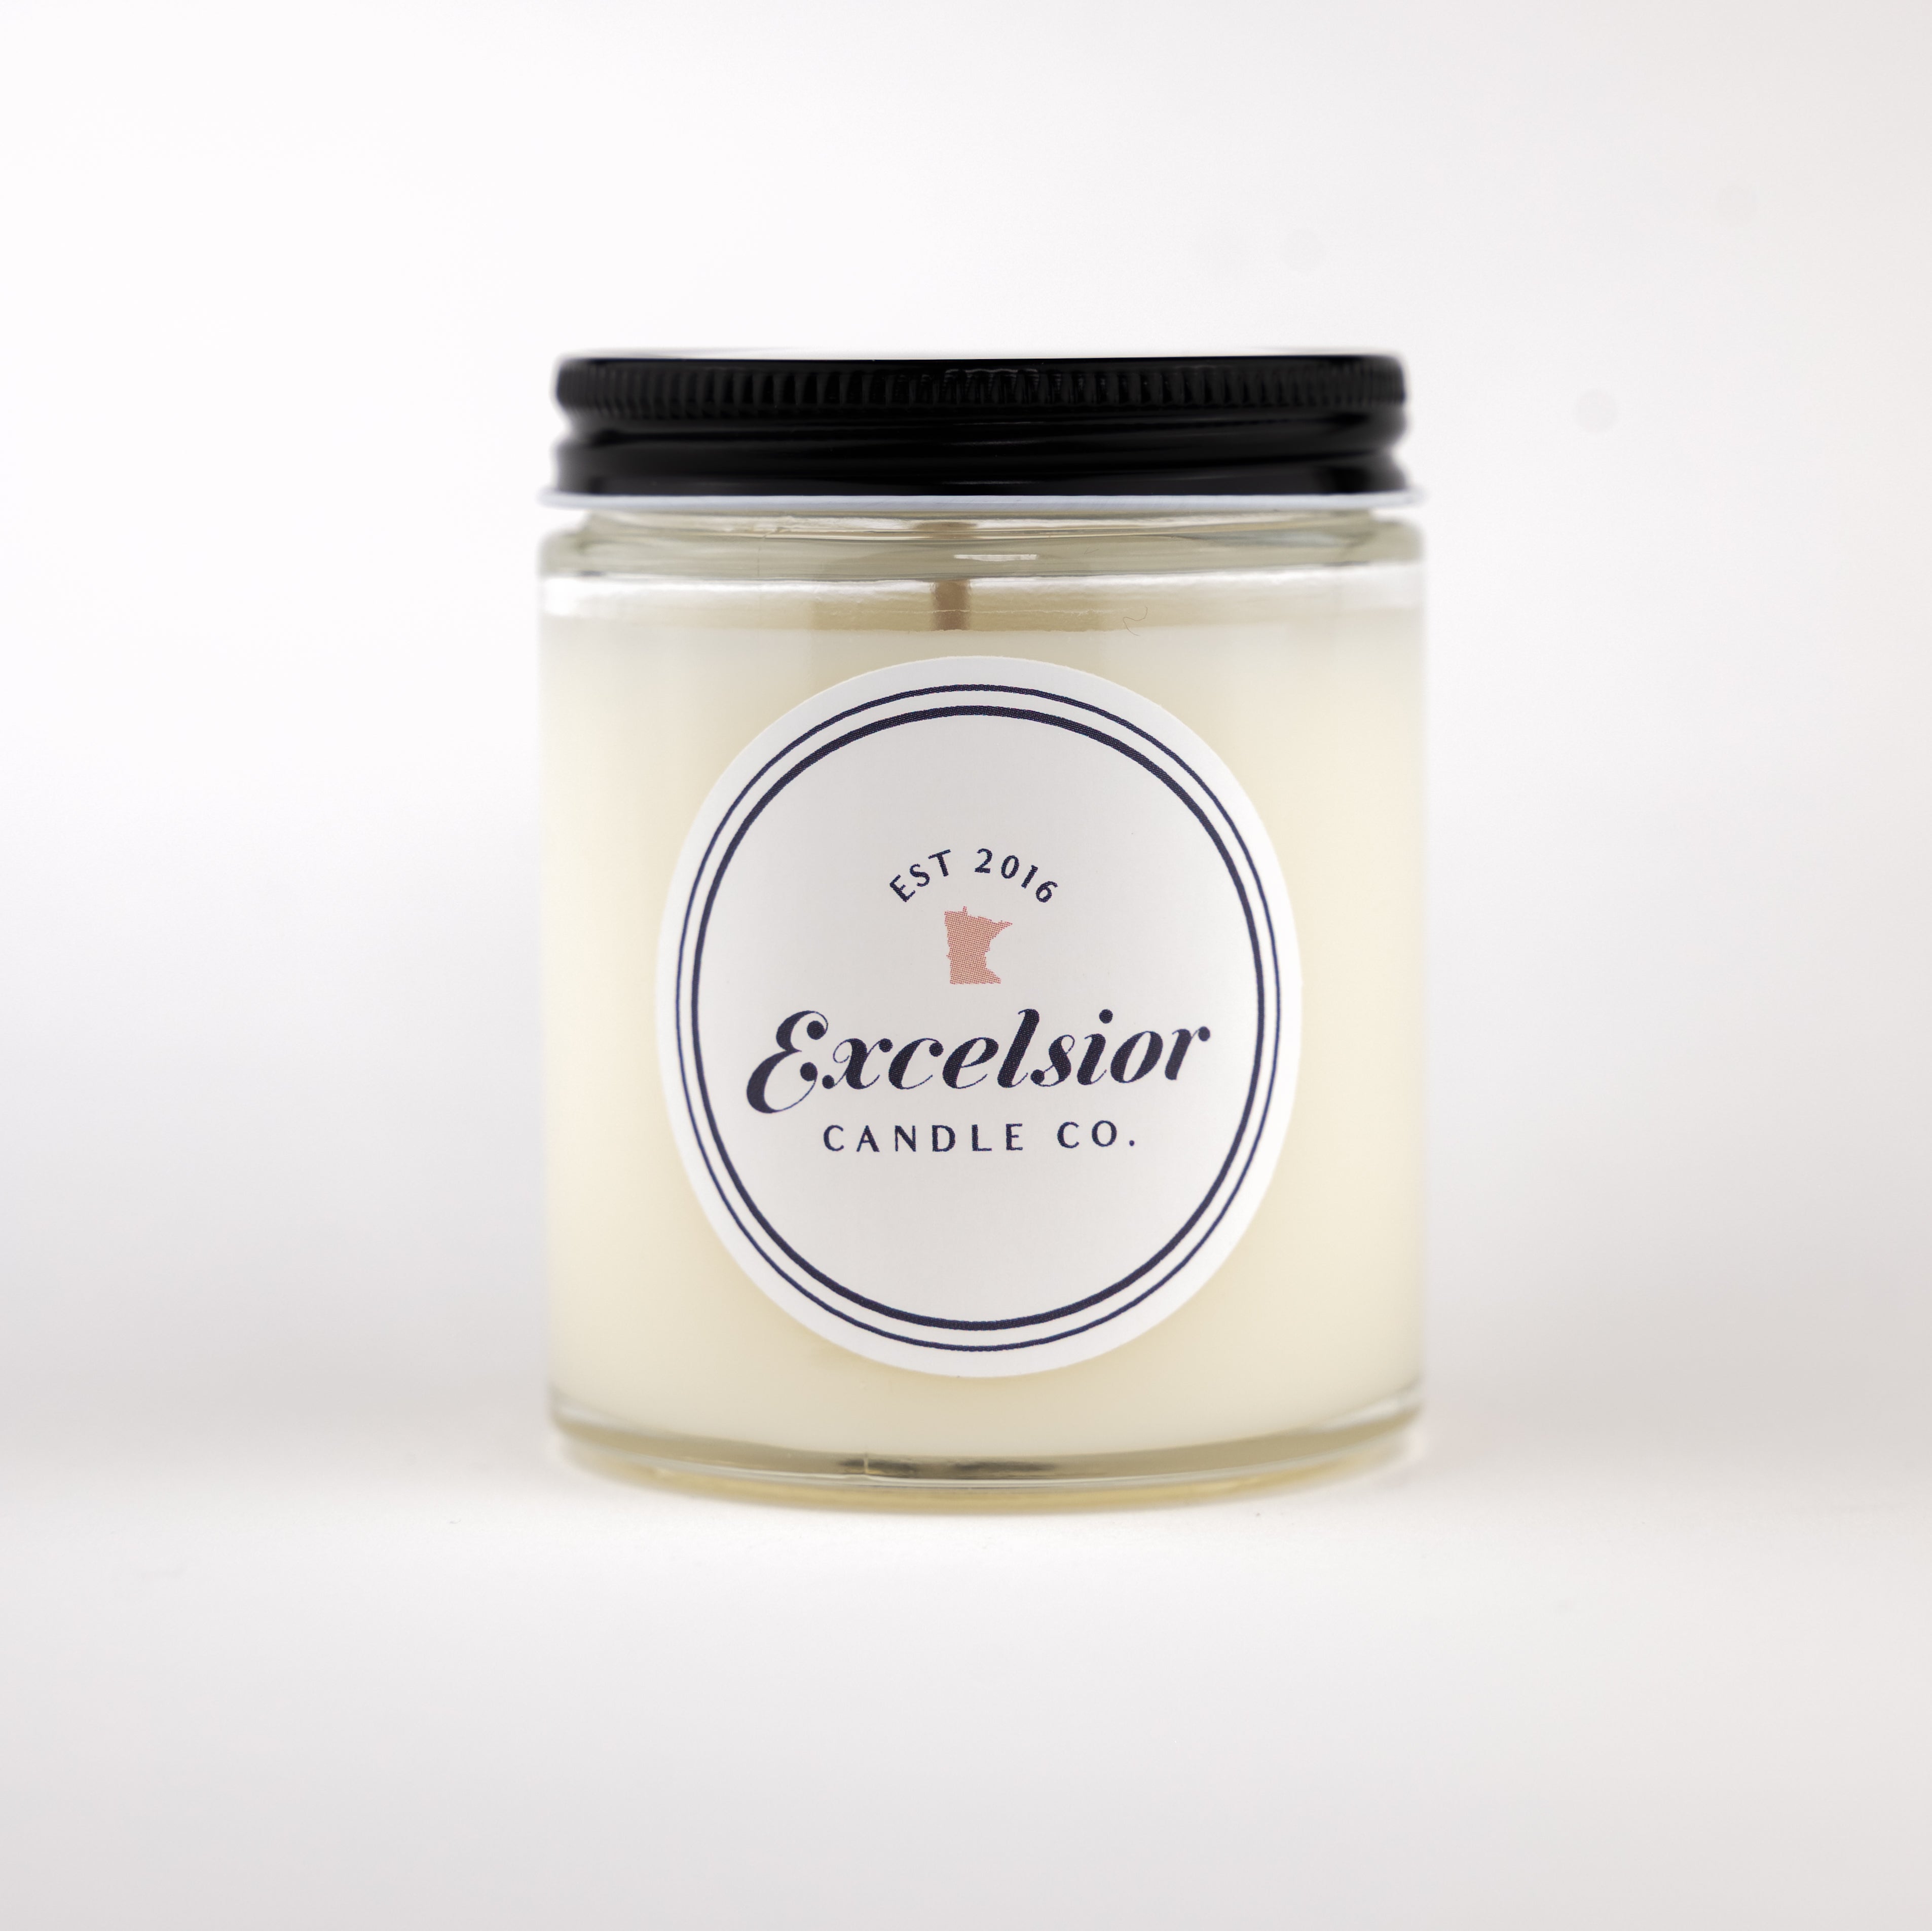 Toasted Southern Pecan Soy Candle